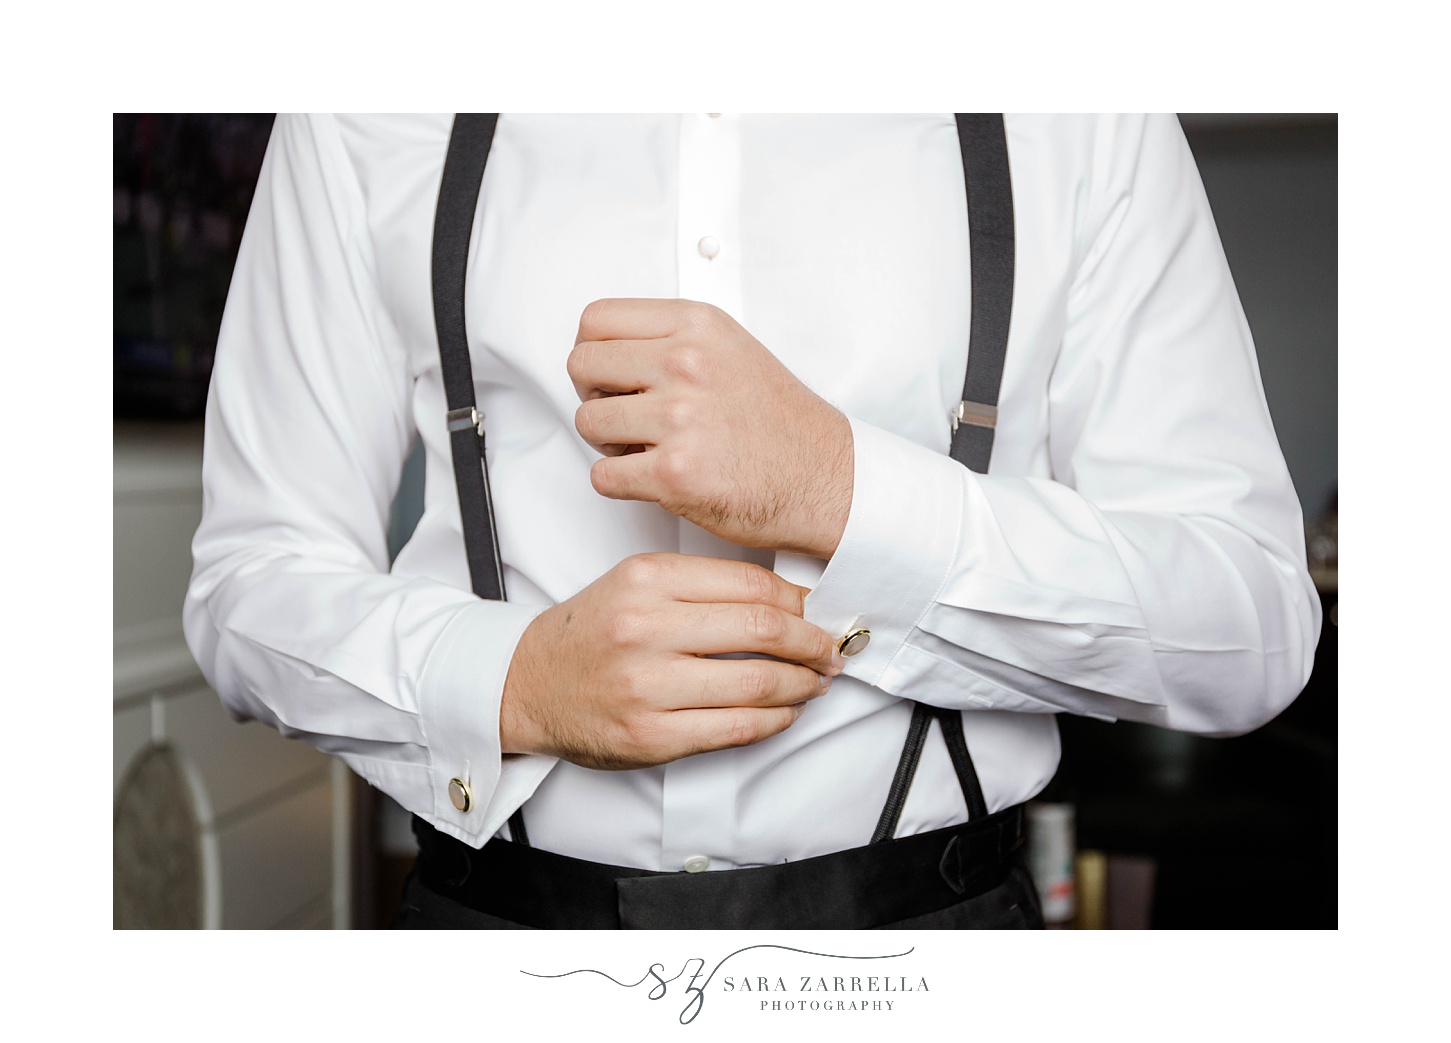 groom stands in white shirt with suspenders adjusting cufflinks